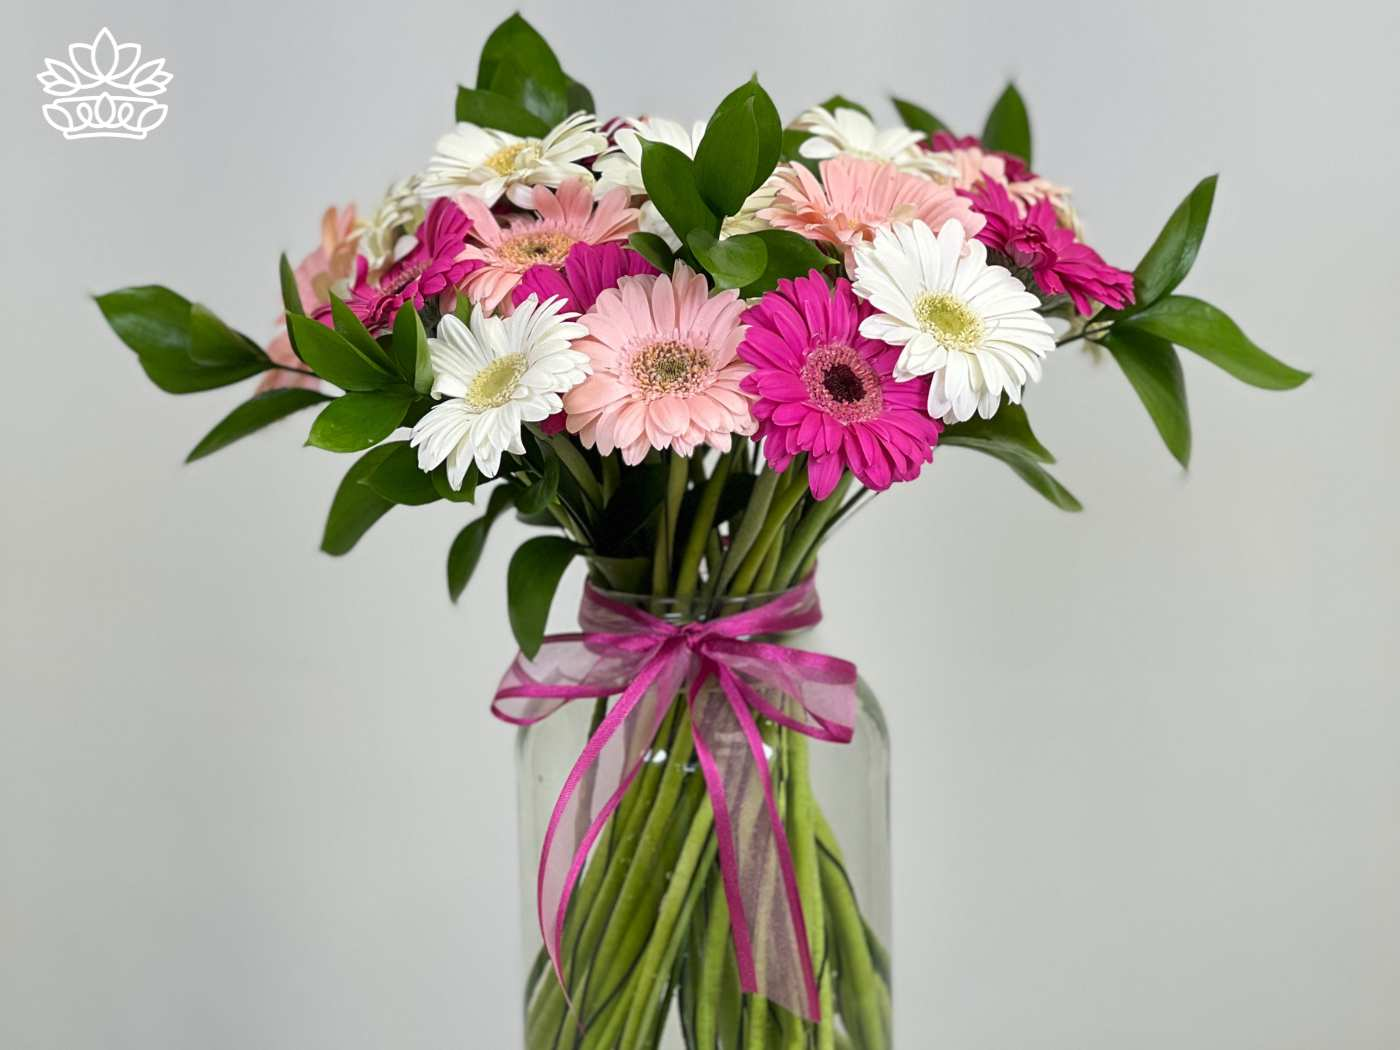 A bouquet of pink, white, and light peach Gerbera daisies, arranged with green foliage in a clear vase, tied with a pink ribbon. Fabulous Flowers and Gifts. Gerberas Collection. Delivered with Heart.